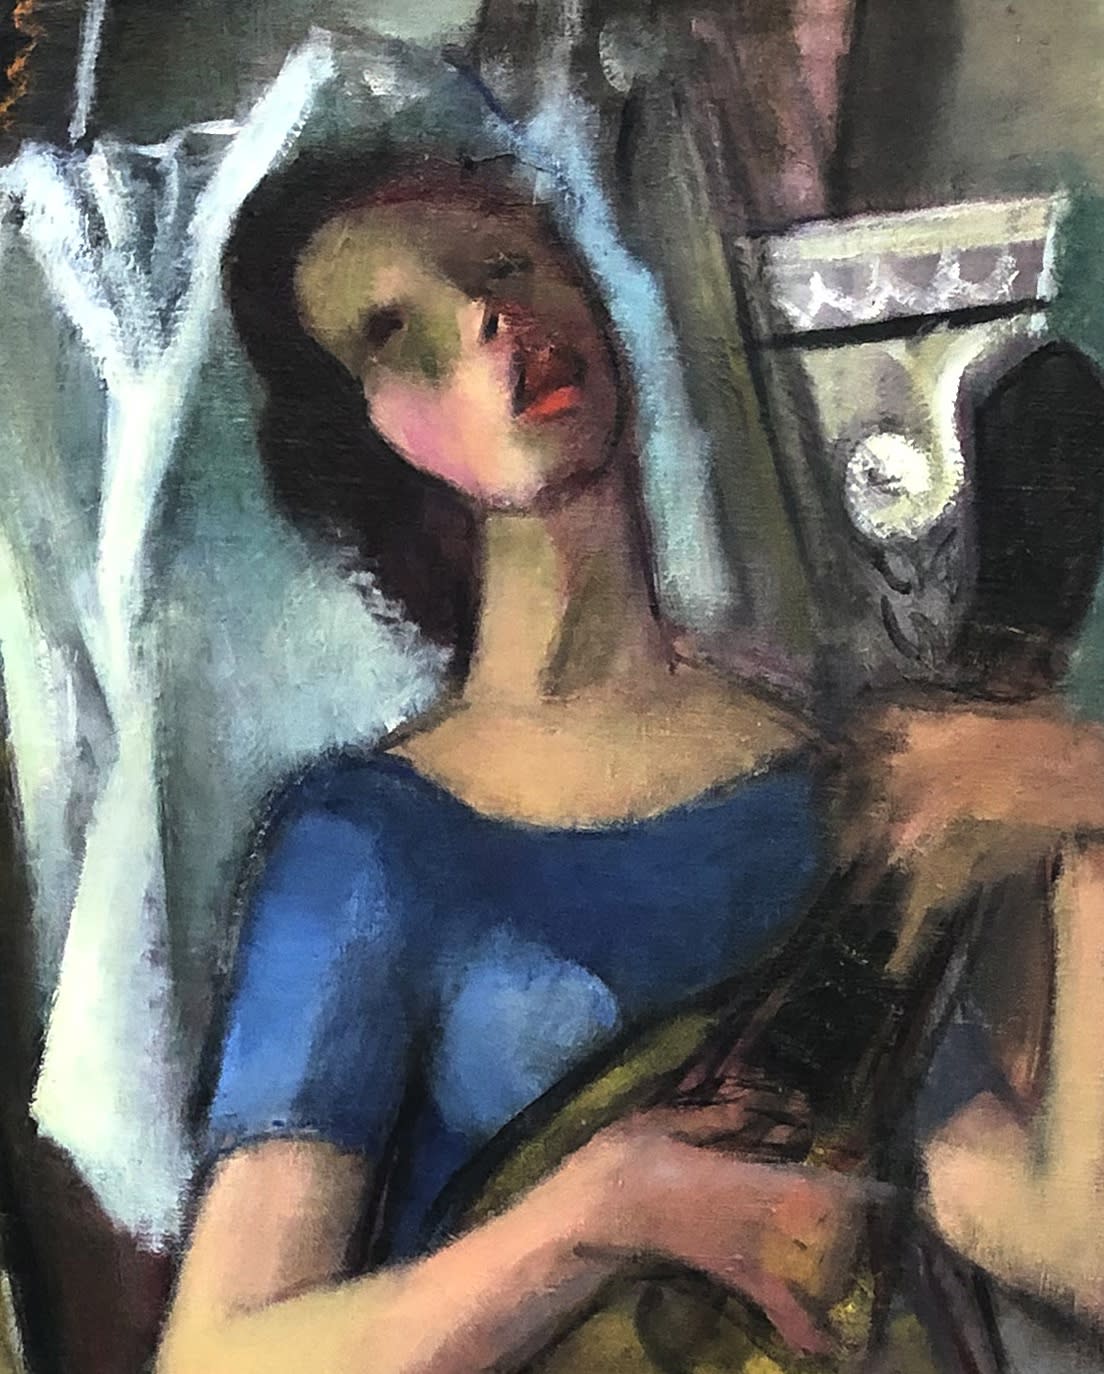 Woman With A Guitar